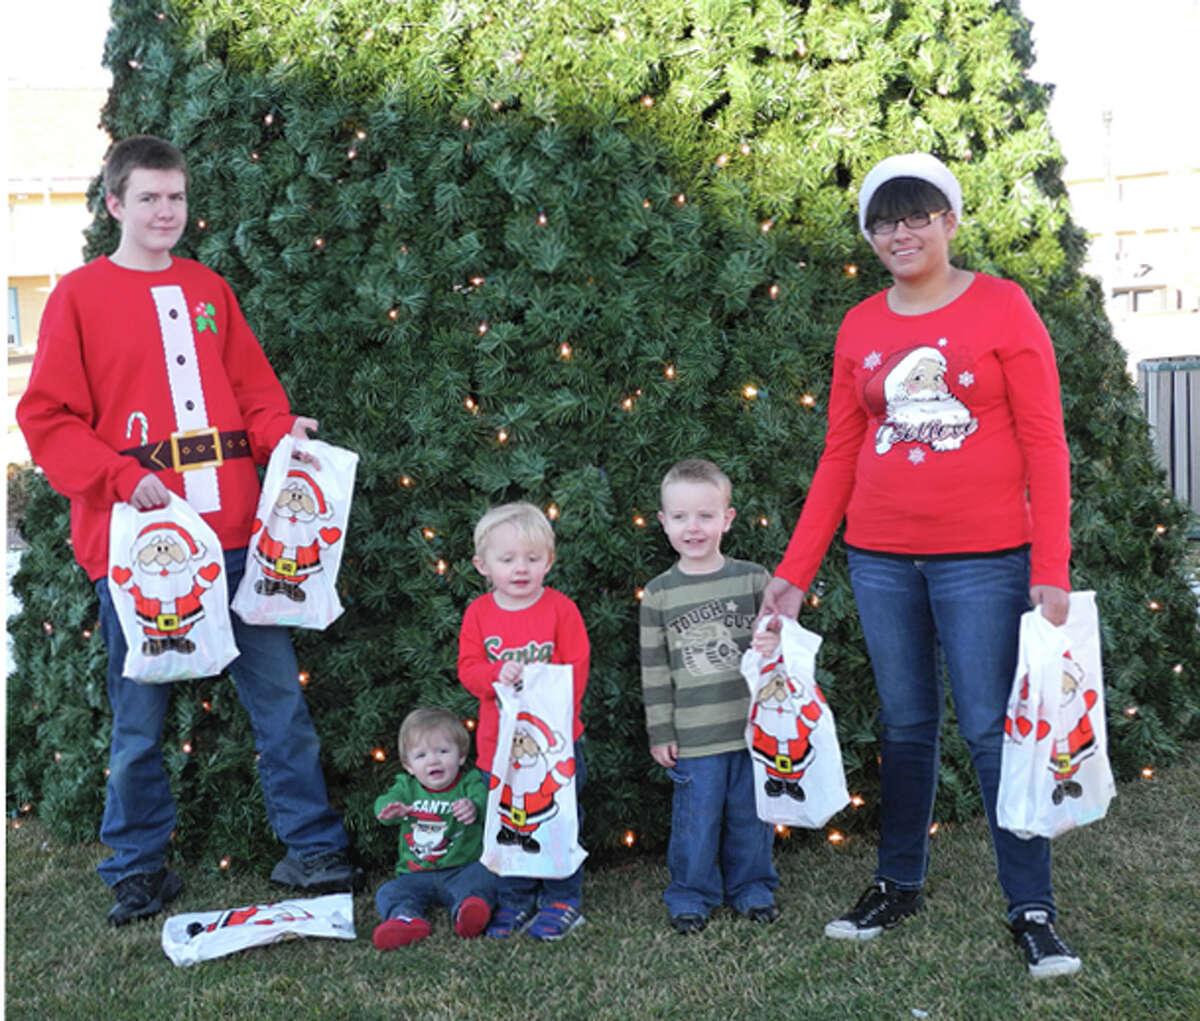 4-H members will help Santa distribute gift bags at Breakfast with Santa at the Ollie Liner Center. Jonathon Farmer is the helper at left, and Beatrice Rodriguez is the helper at right. Kleat Barrett (left), Colt Barrett and Alex Farmer are waiting for Santa.